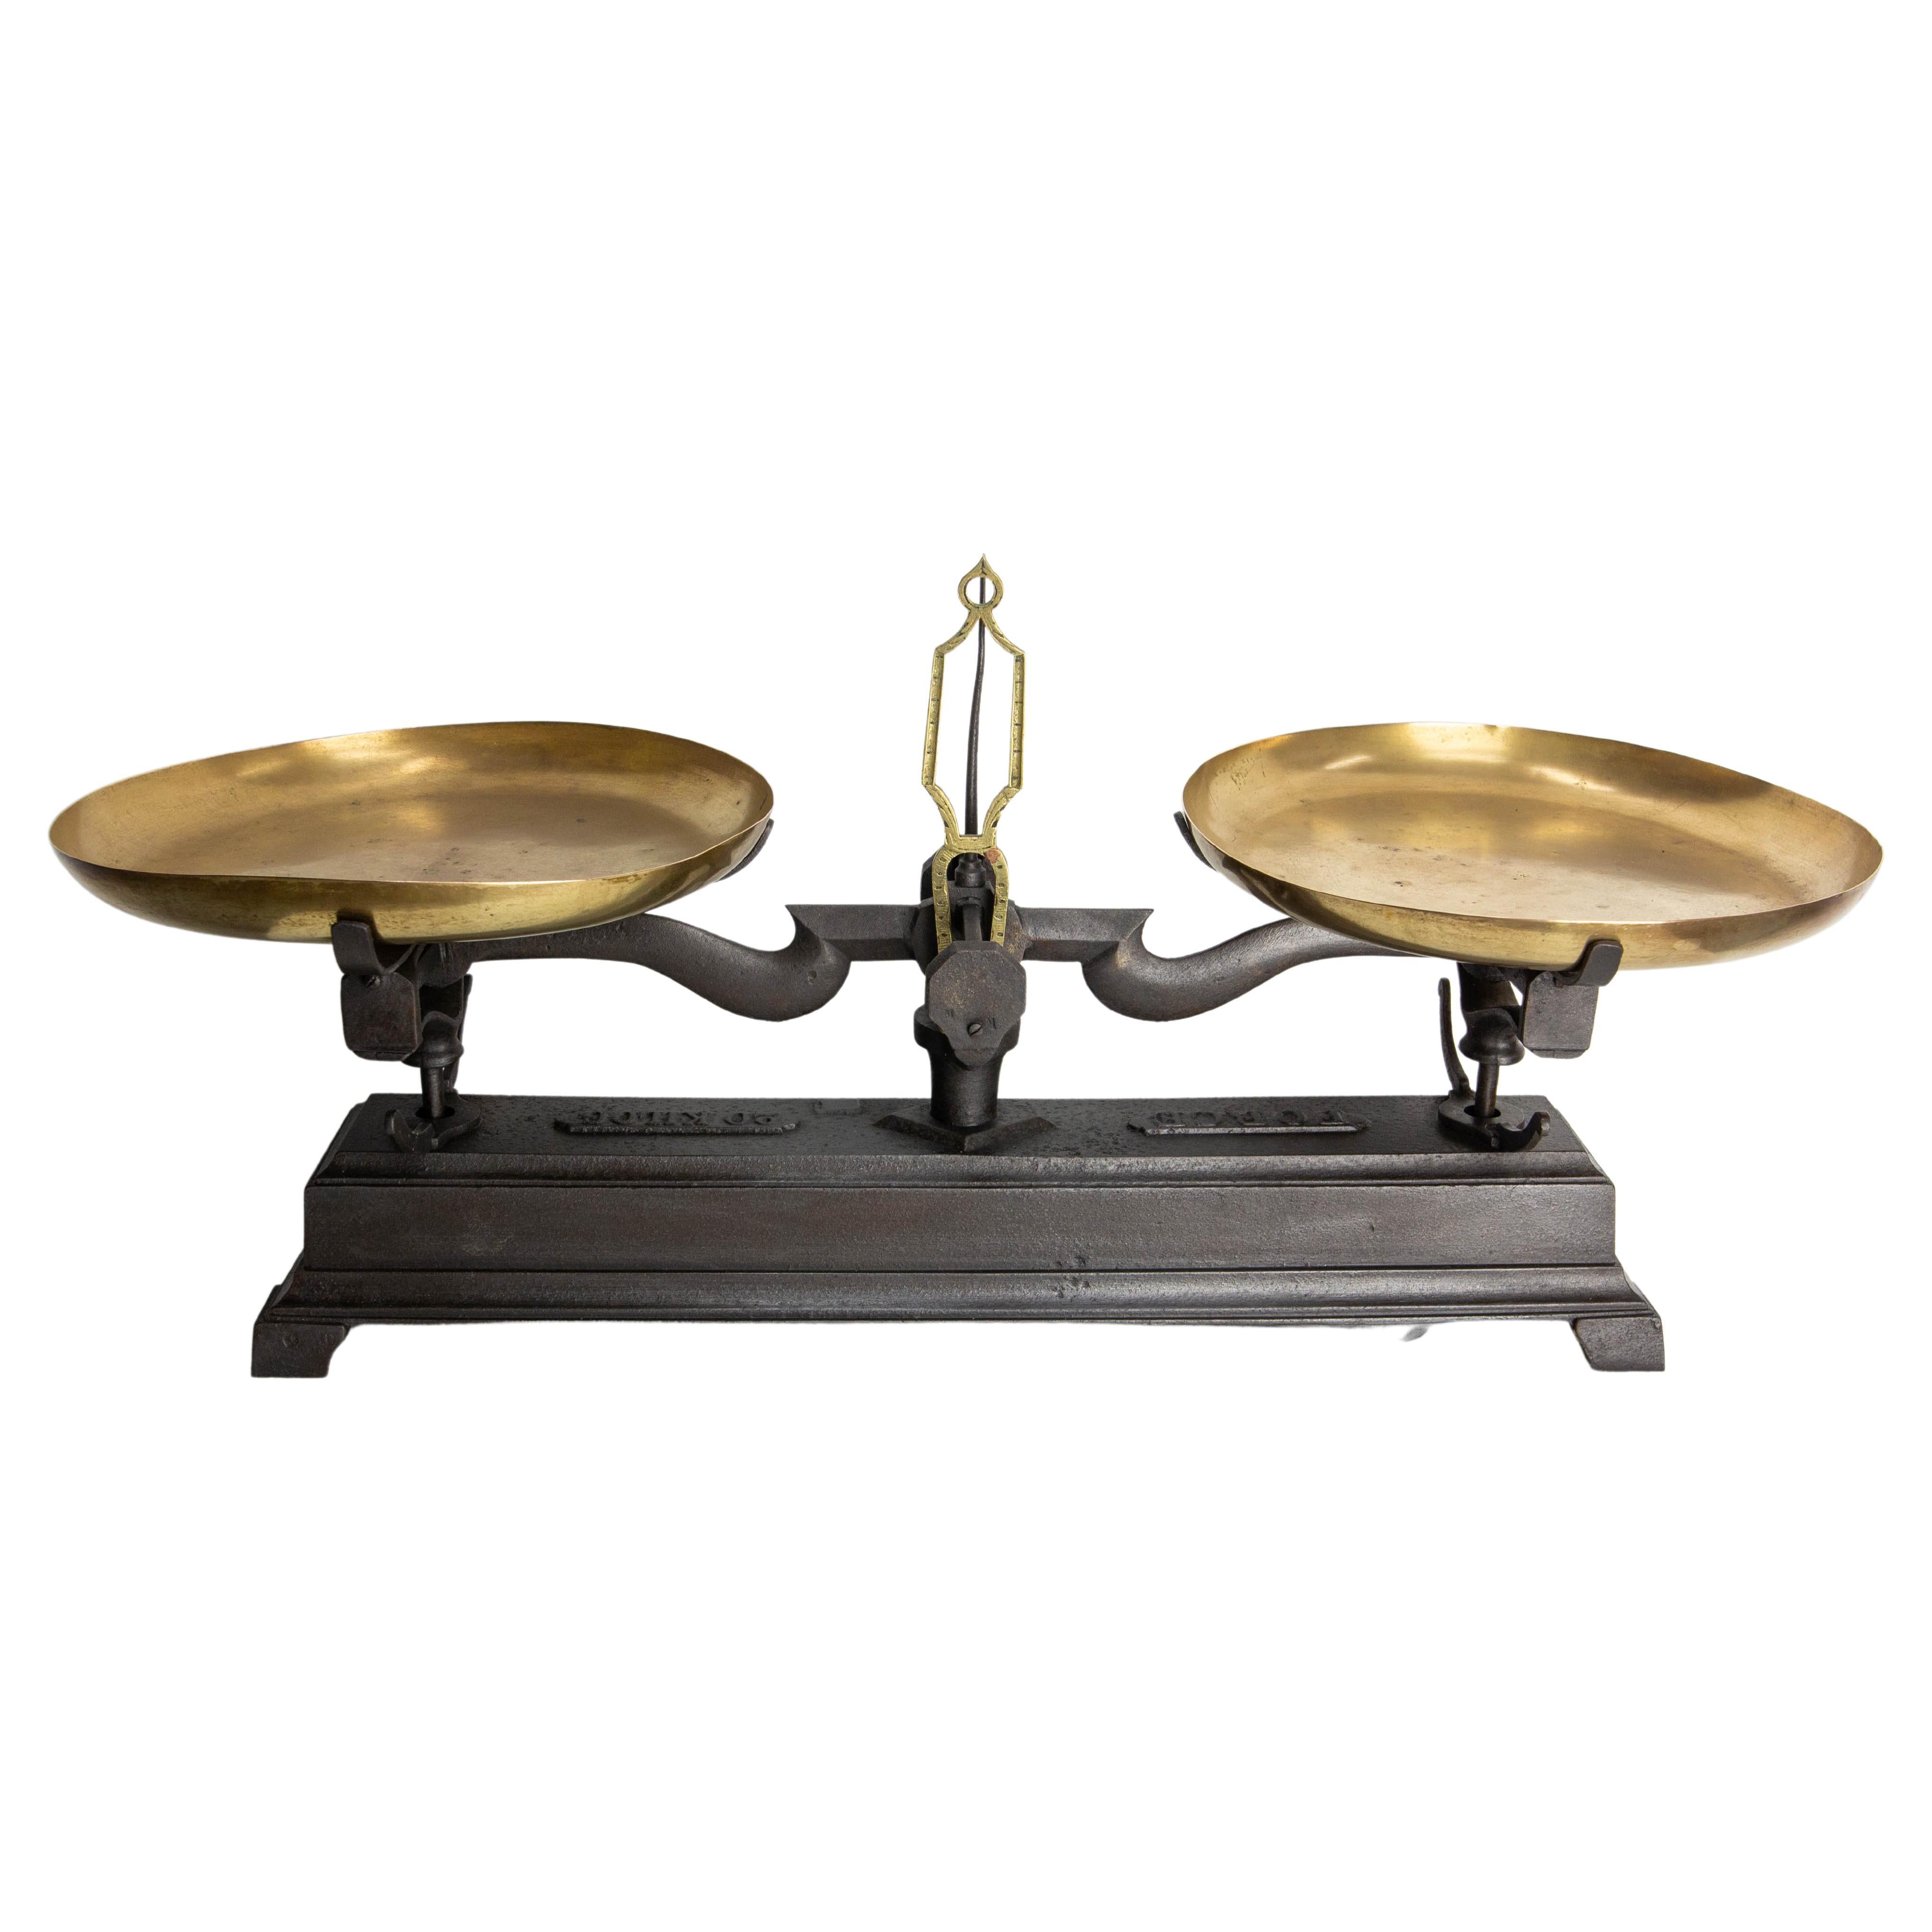 This trade scale was made in the late 19th century in France; It was a scale used by traders for retail
Brass and Cast-Iron
Patina and signs of use which make this antique object very characterful
Noticed in the cast iron : 